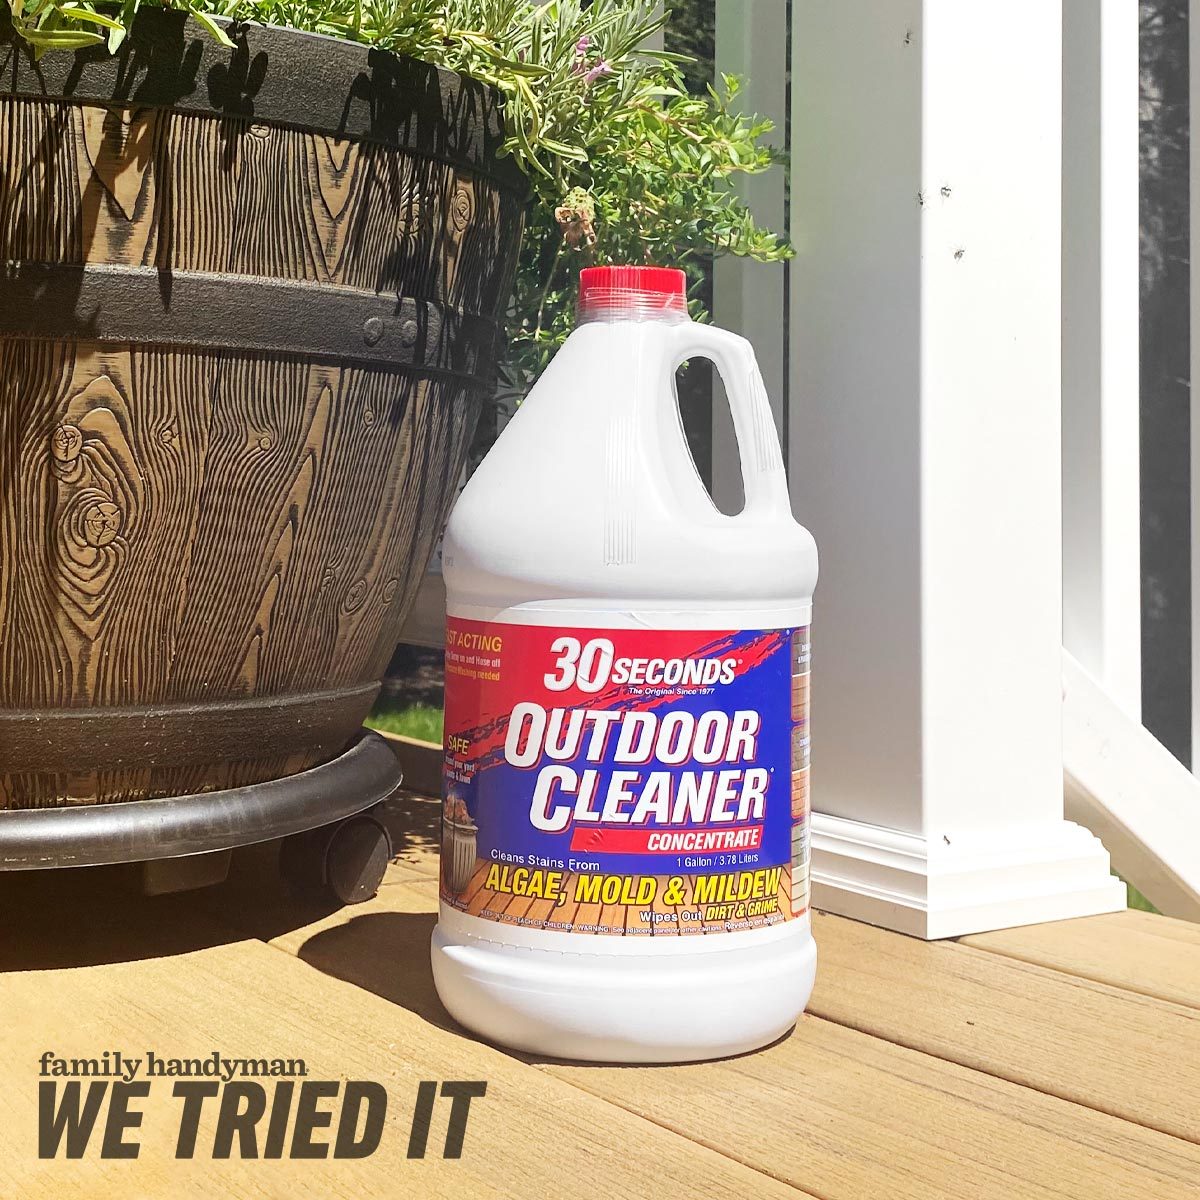 Does 30 SECONDS Outdoor Cleaner Contain Bleach?